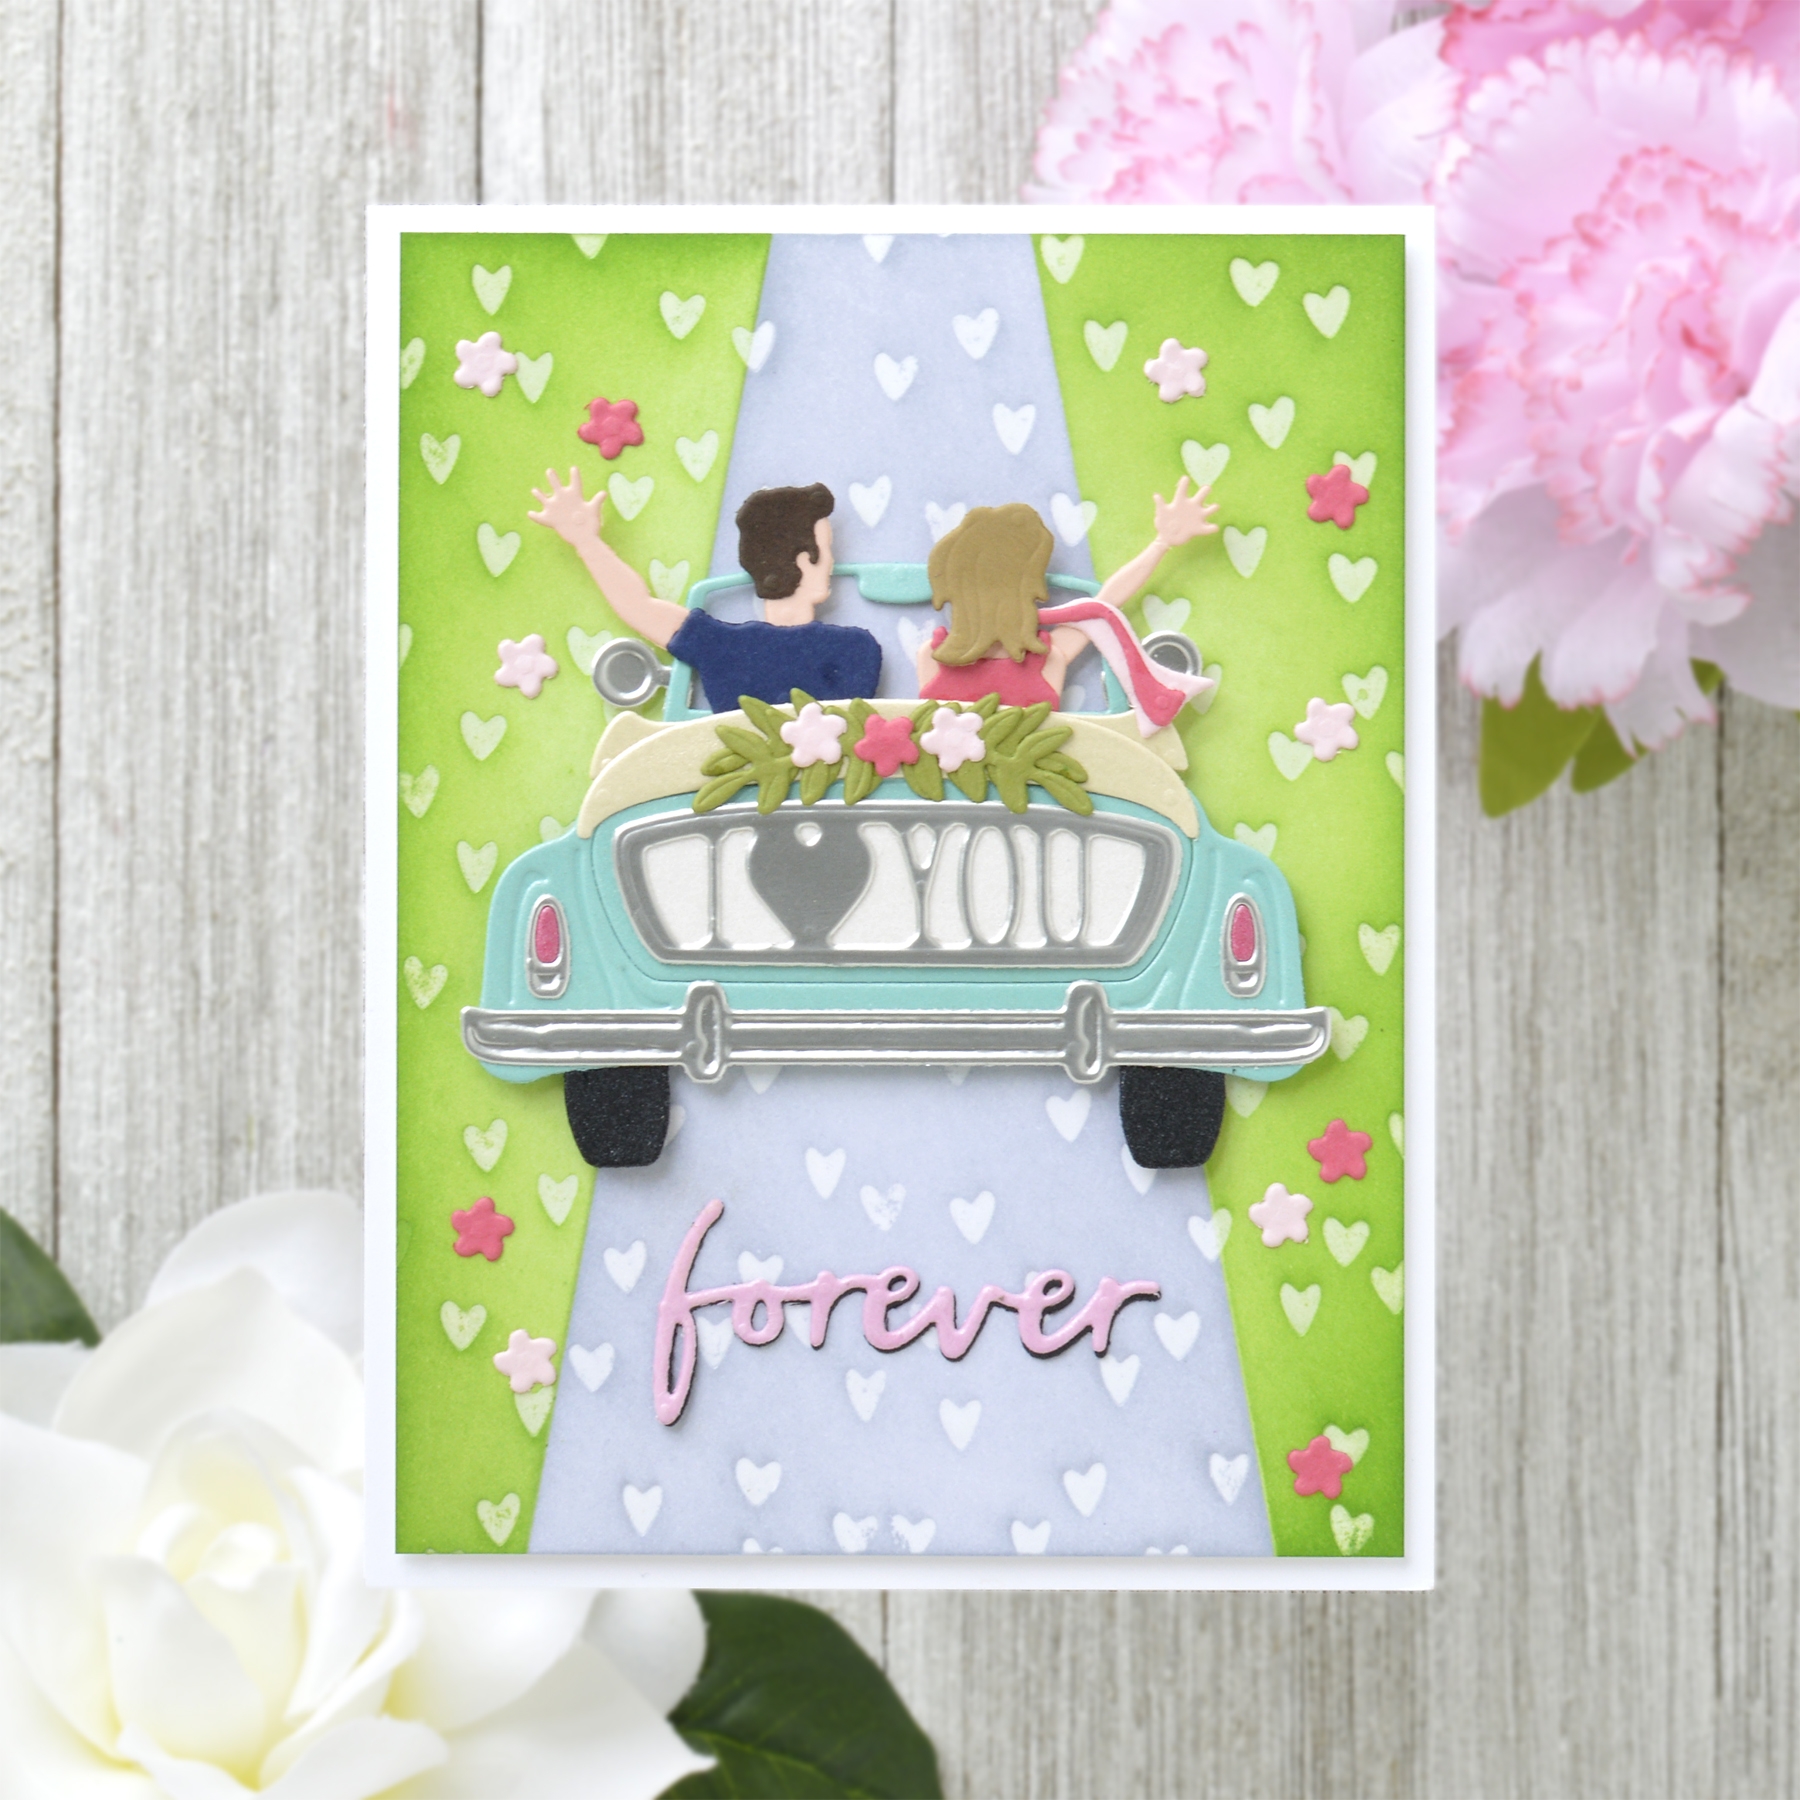 Expressions of Love Collection - Card Inspiration with Annie Williams -  Spellbinder Blog